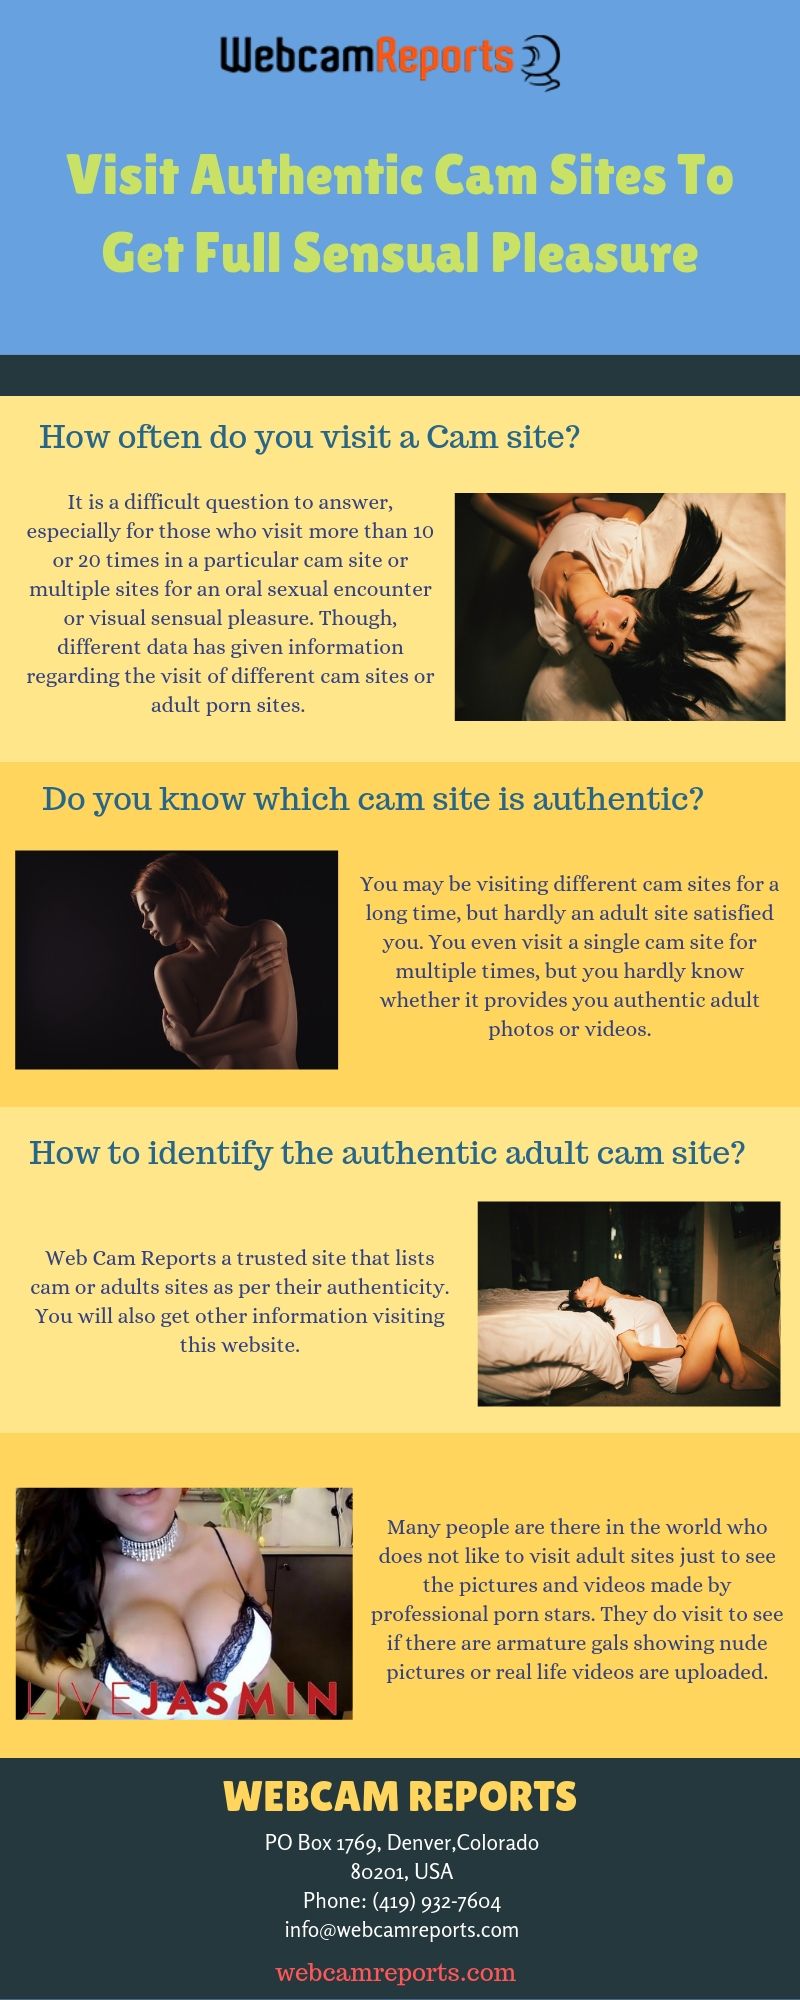 Visit Authentic cam sites to get full sensual pleasure Live sexual encounter is now easy with cam sites. Visit authentic websites and get full sensual pleasure with hot and cute blonde. For more details, visit this link: https://bit.ly/2JdaFpv by webcamreports